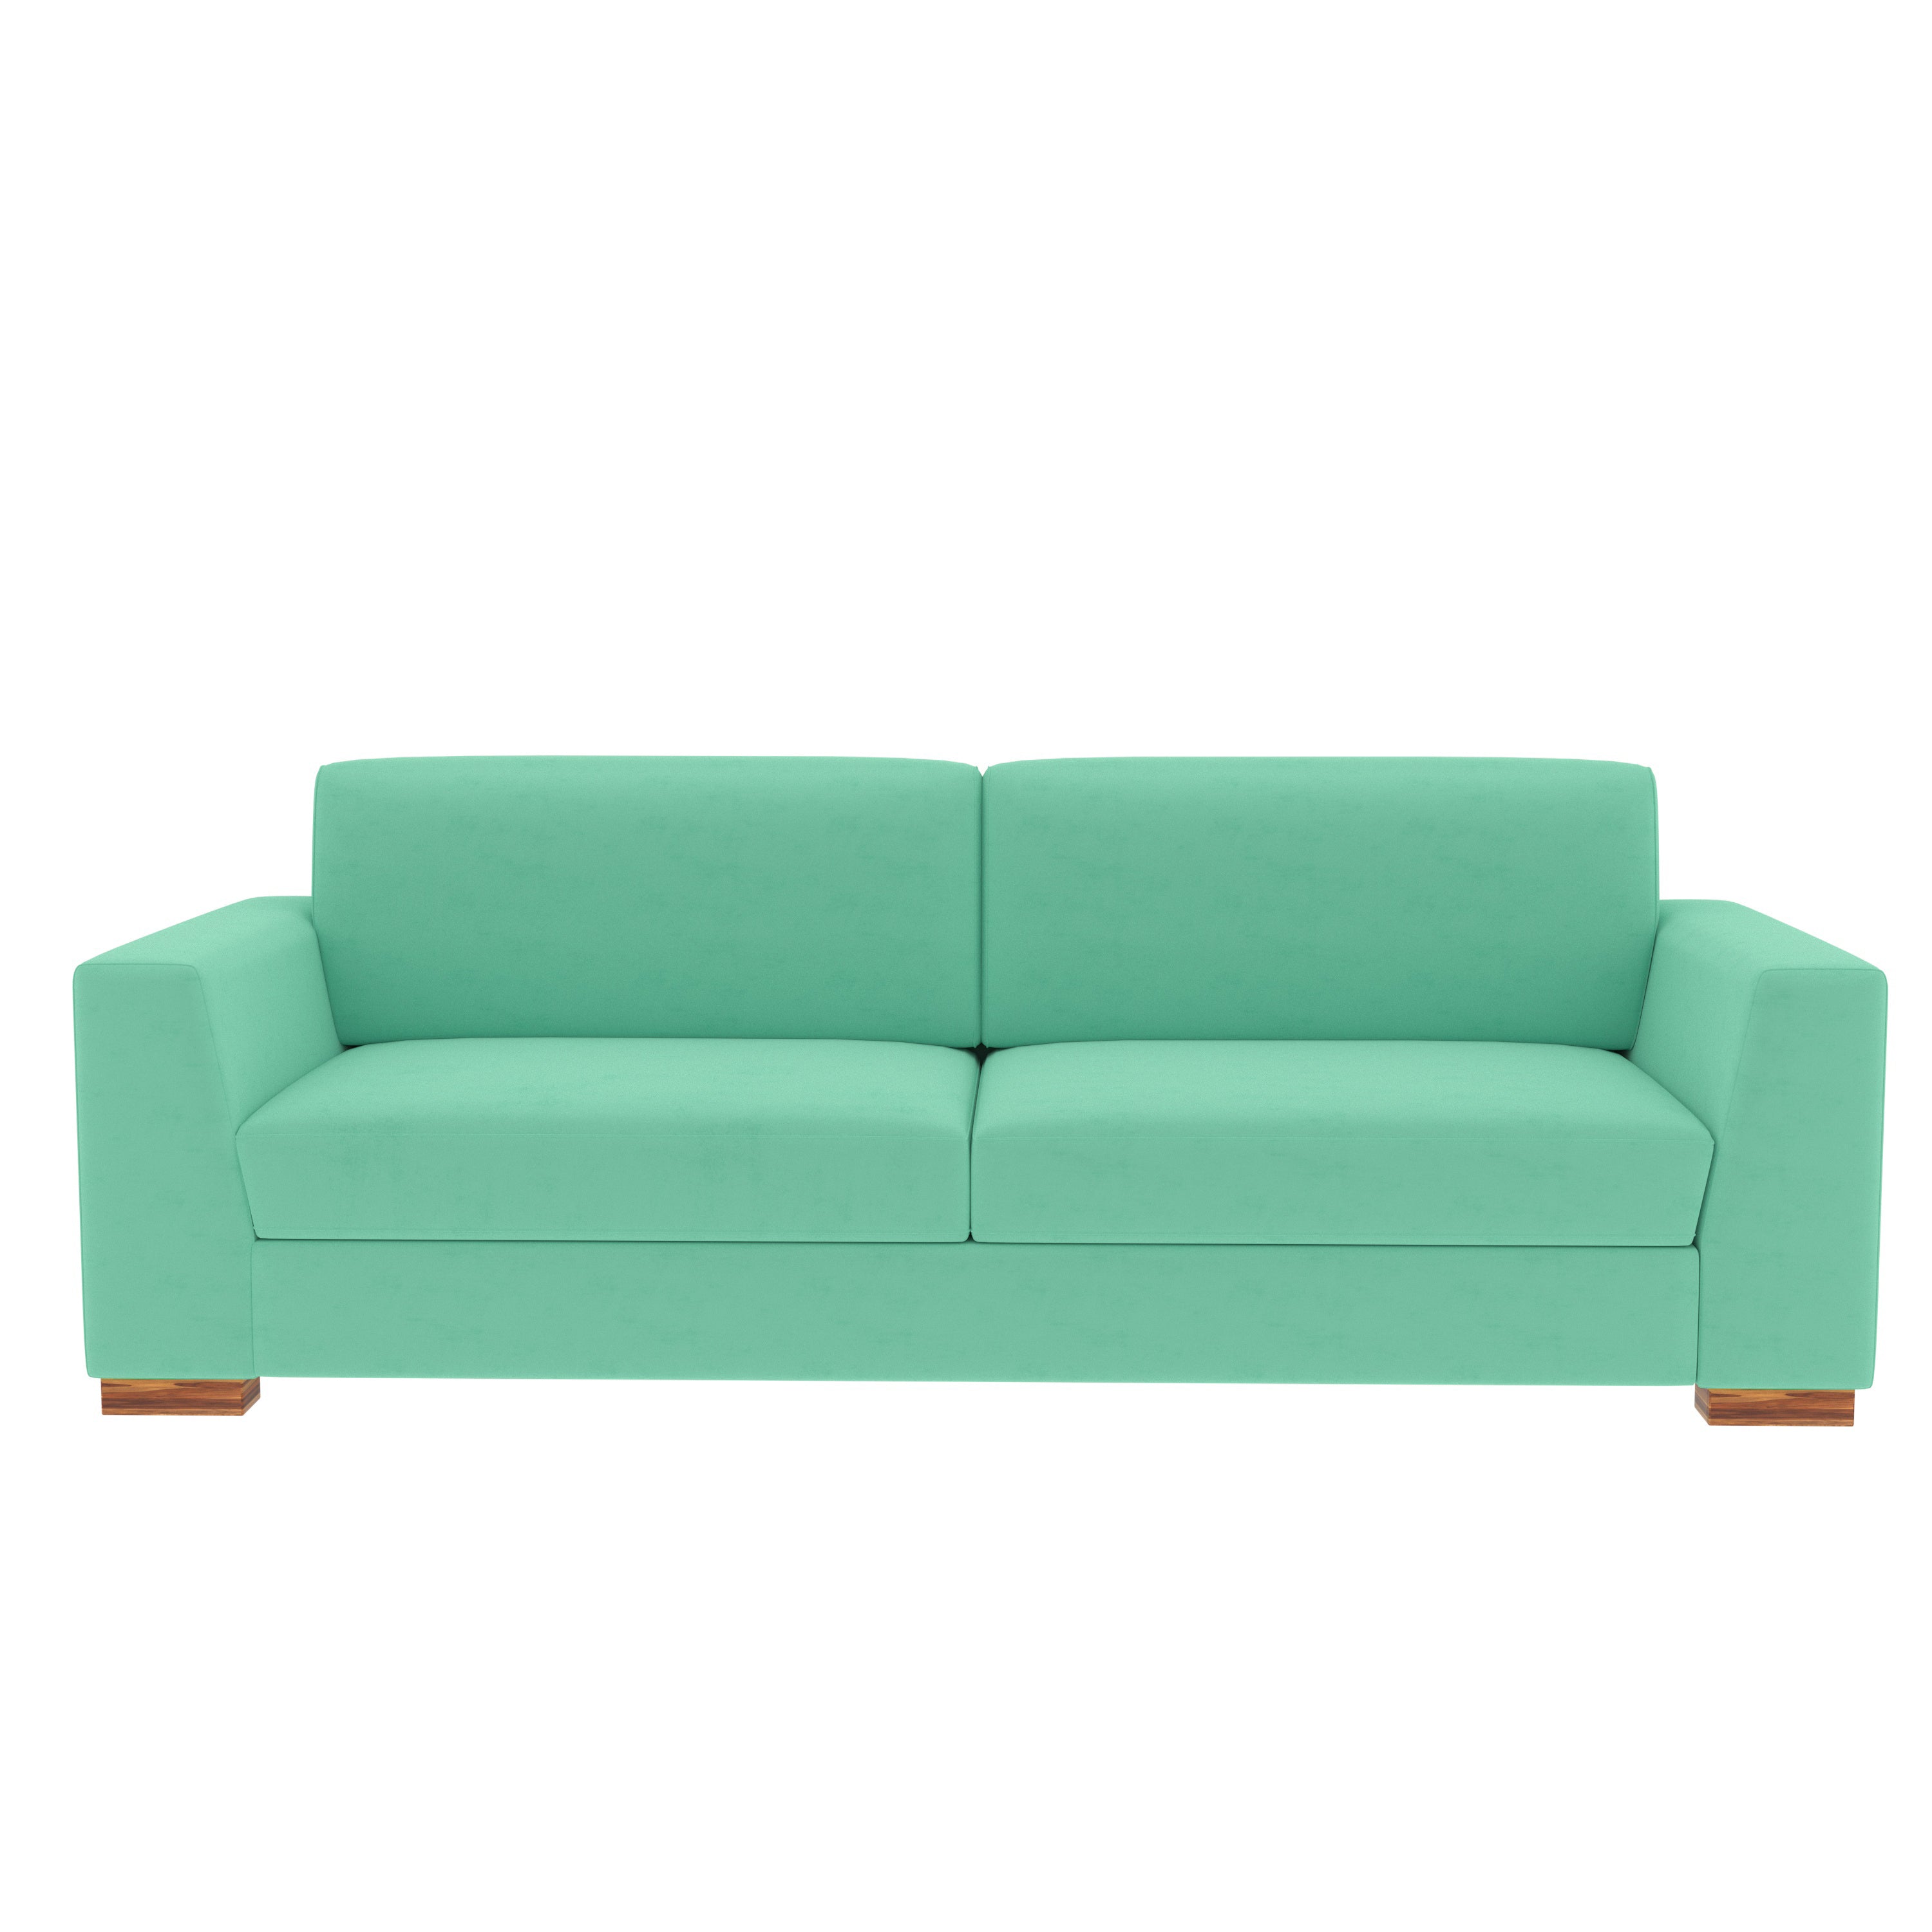 Emeriad Green Pastel Coloured Comfort 2+1 Seater Sofa + Center Table for Home Sofa